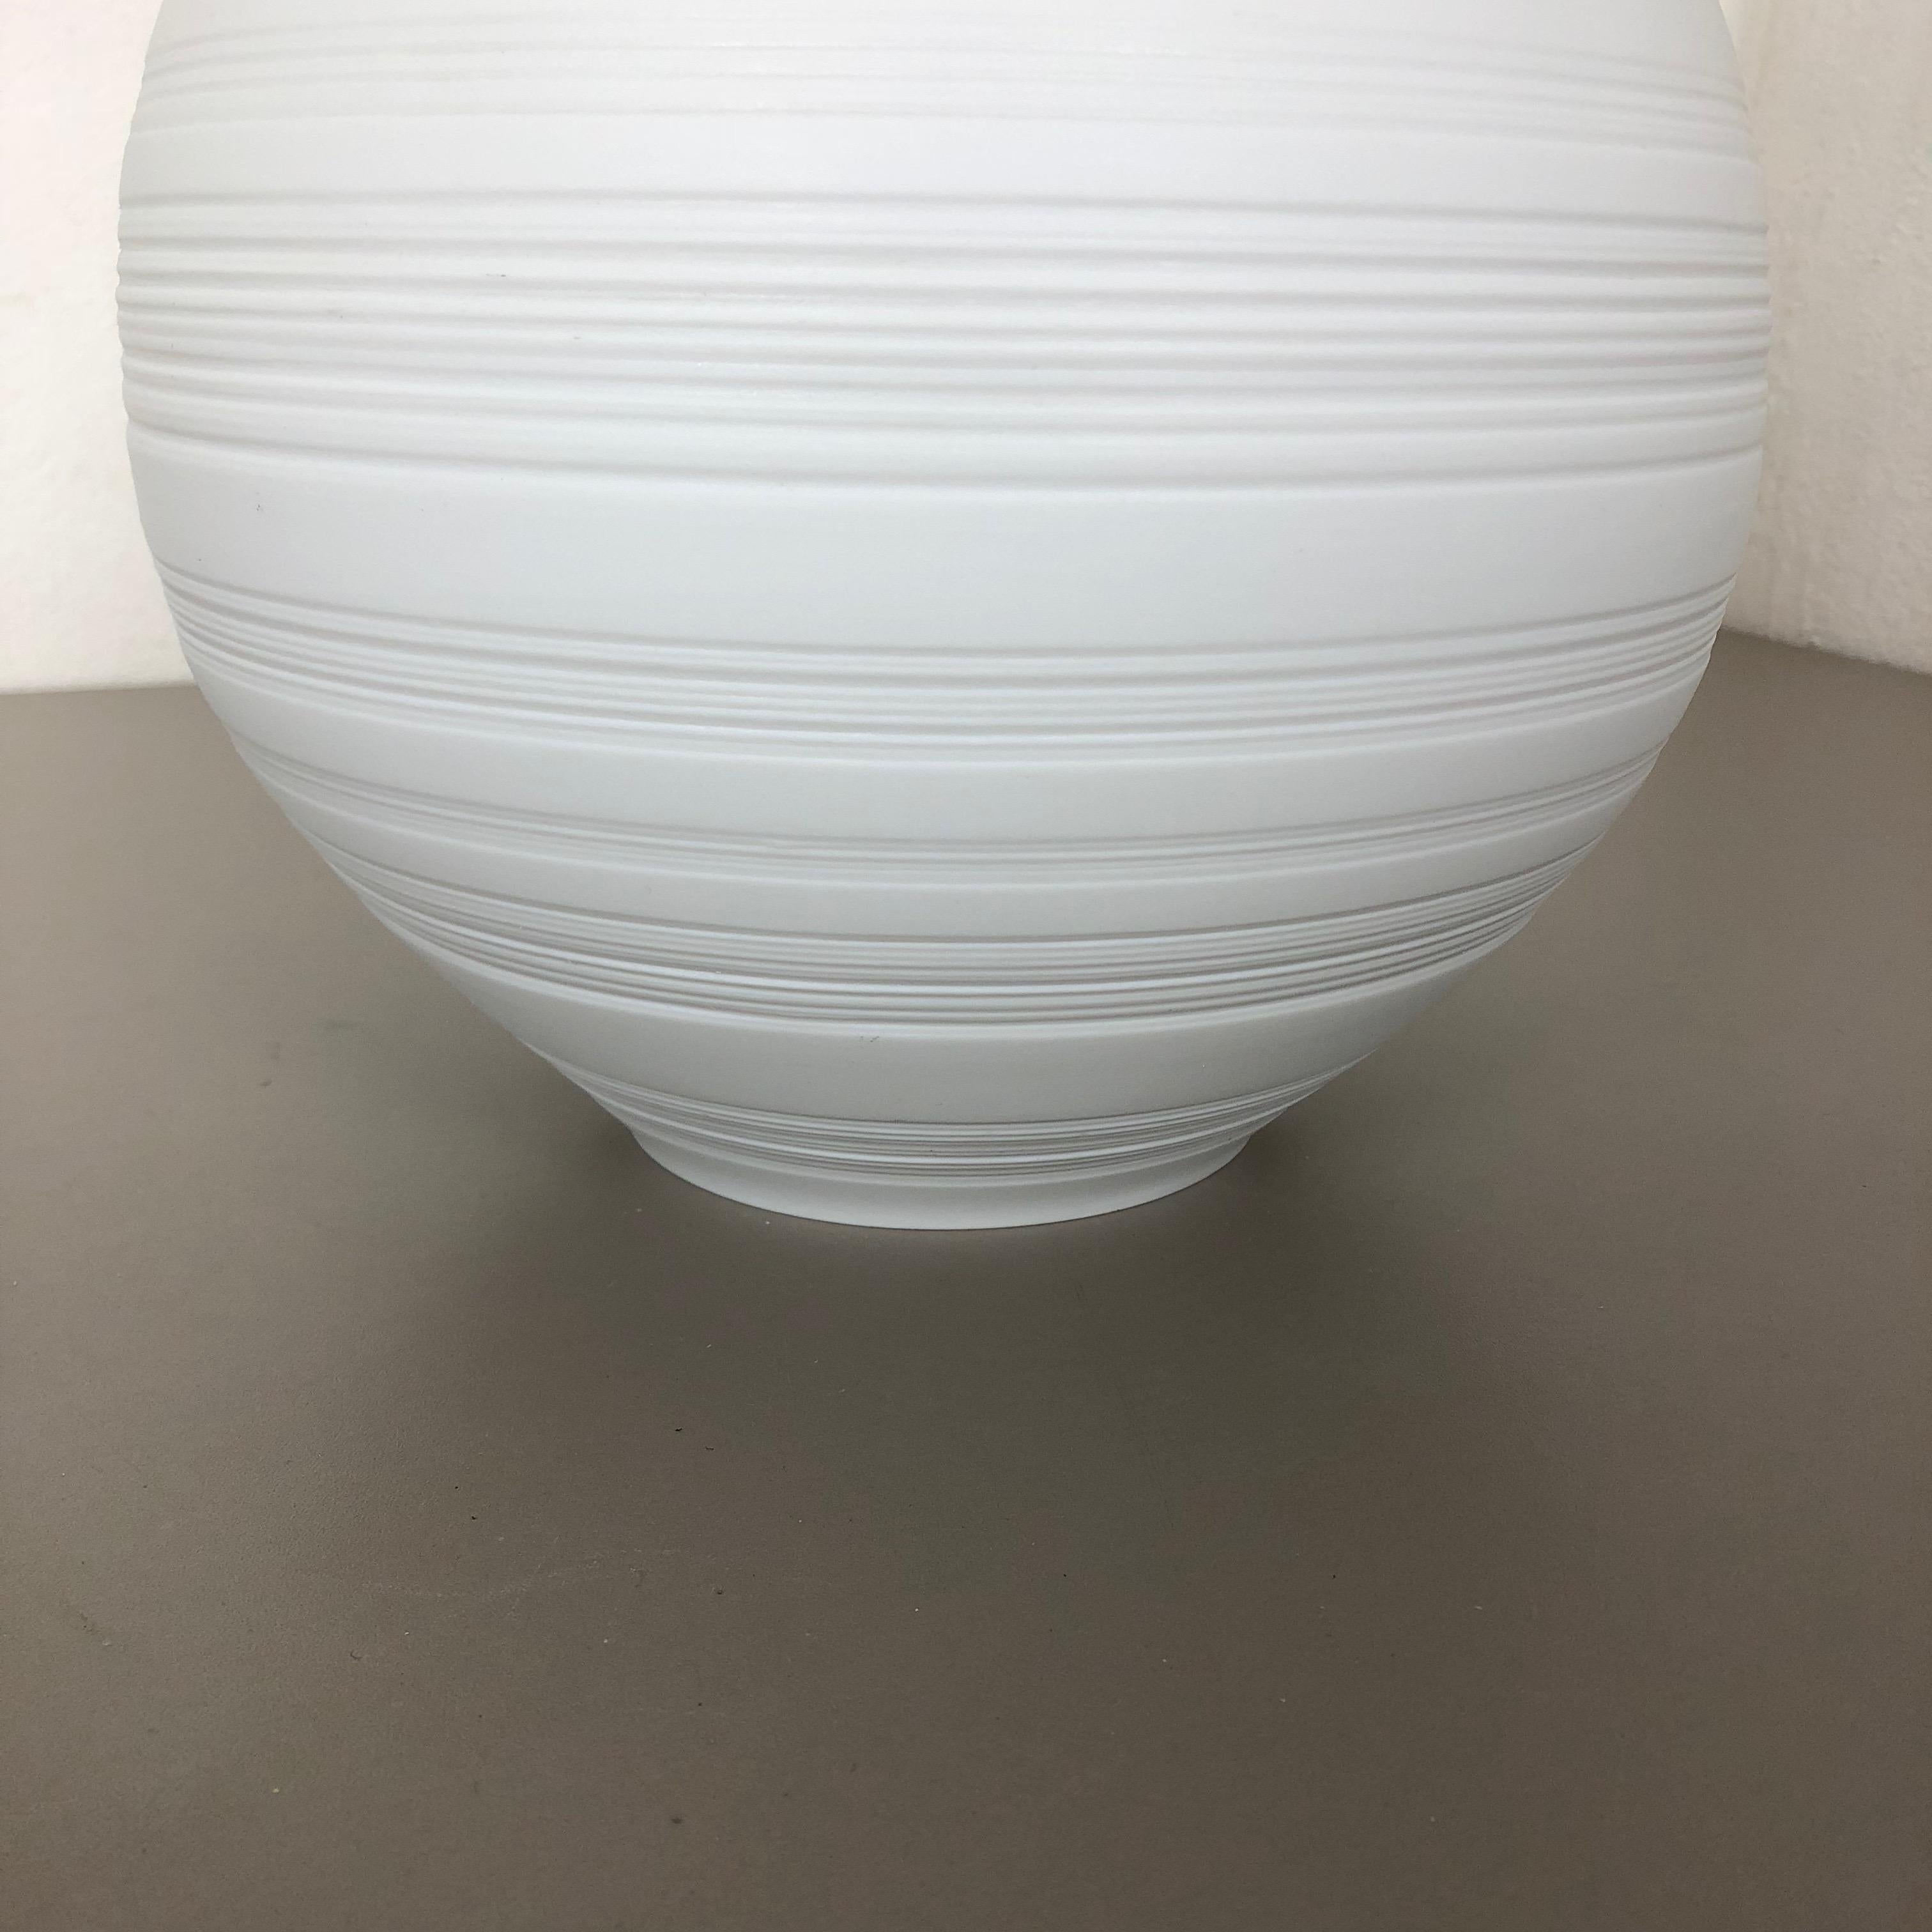 OP Art Vase Biscuit Porcelain by Hans Achtziger for Hutschenreuther, 1970s For Sale 1